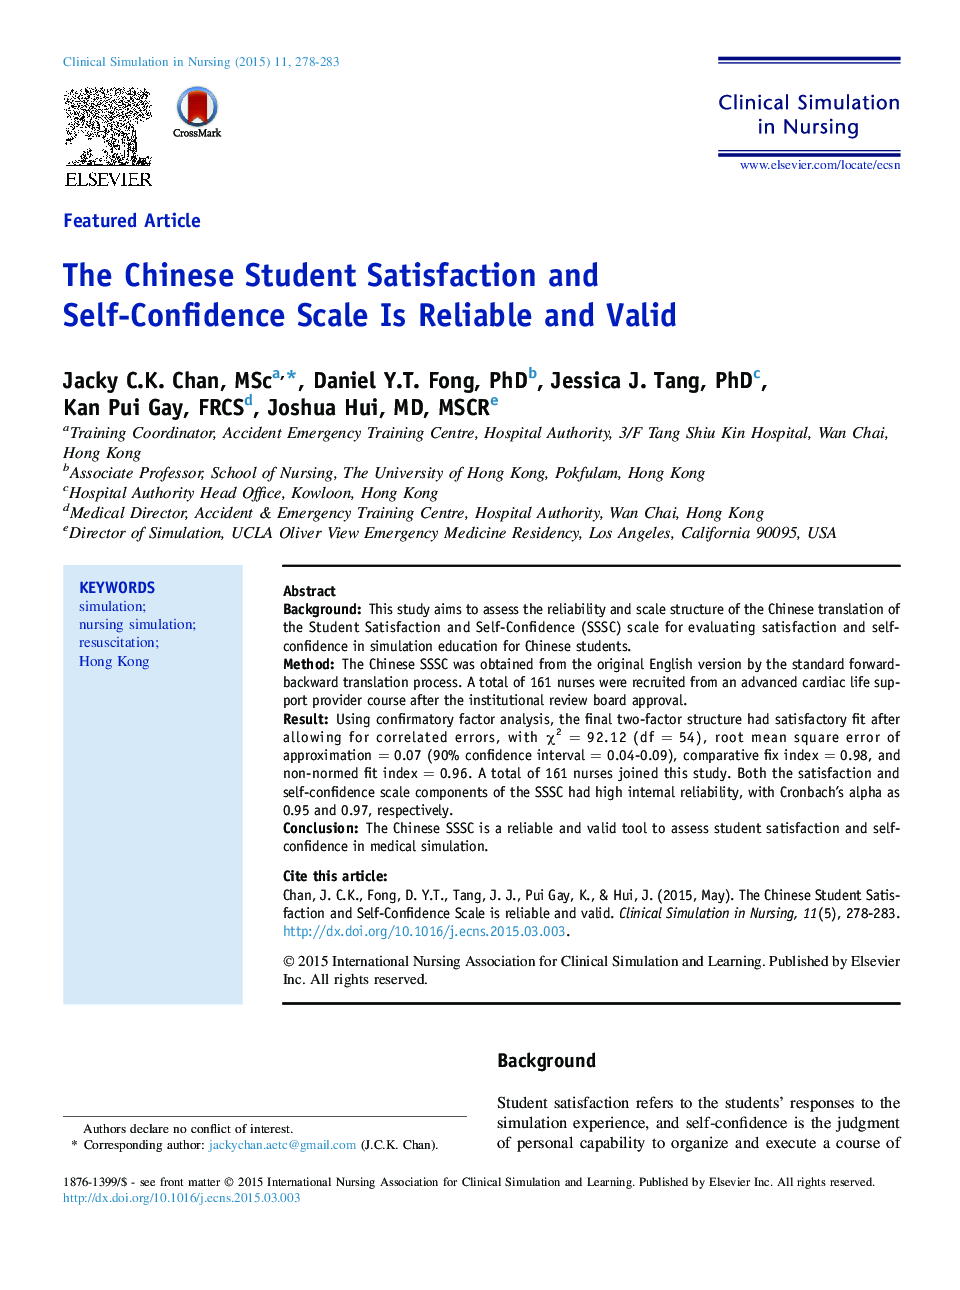 The Chinese Student Satisfaction and Self-Confidence Scale Is Reliable and Valid 